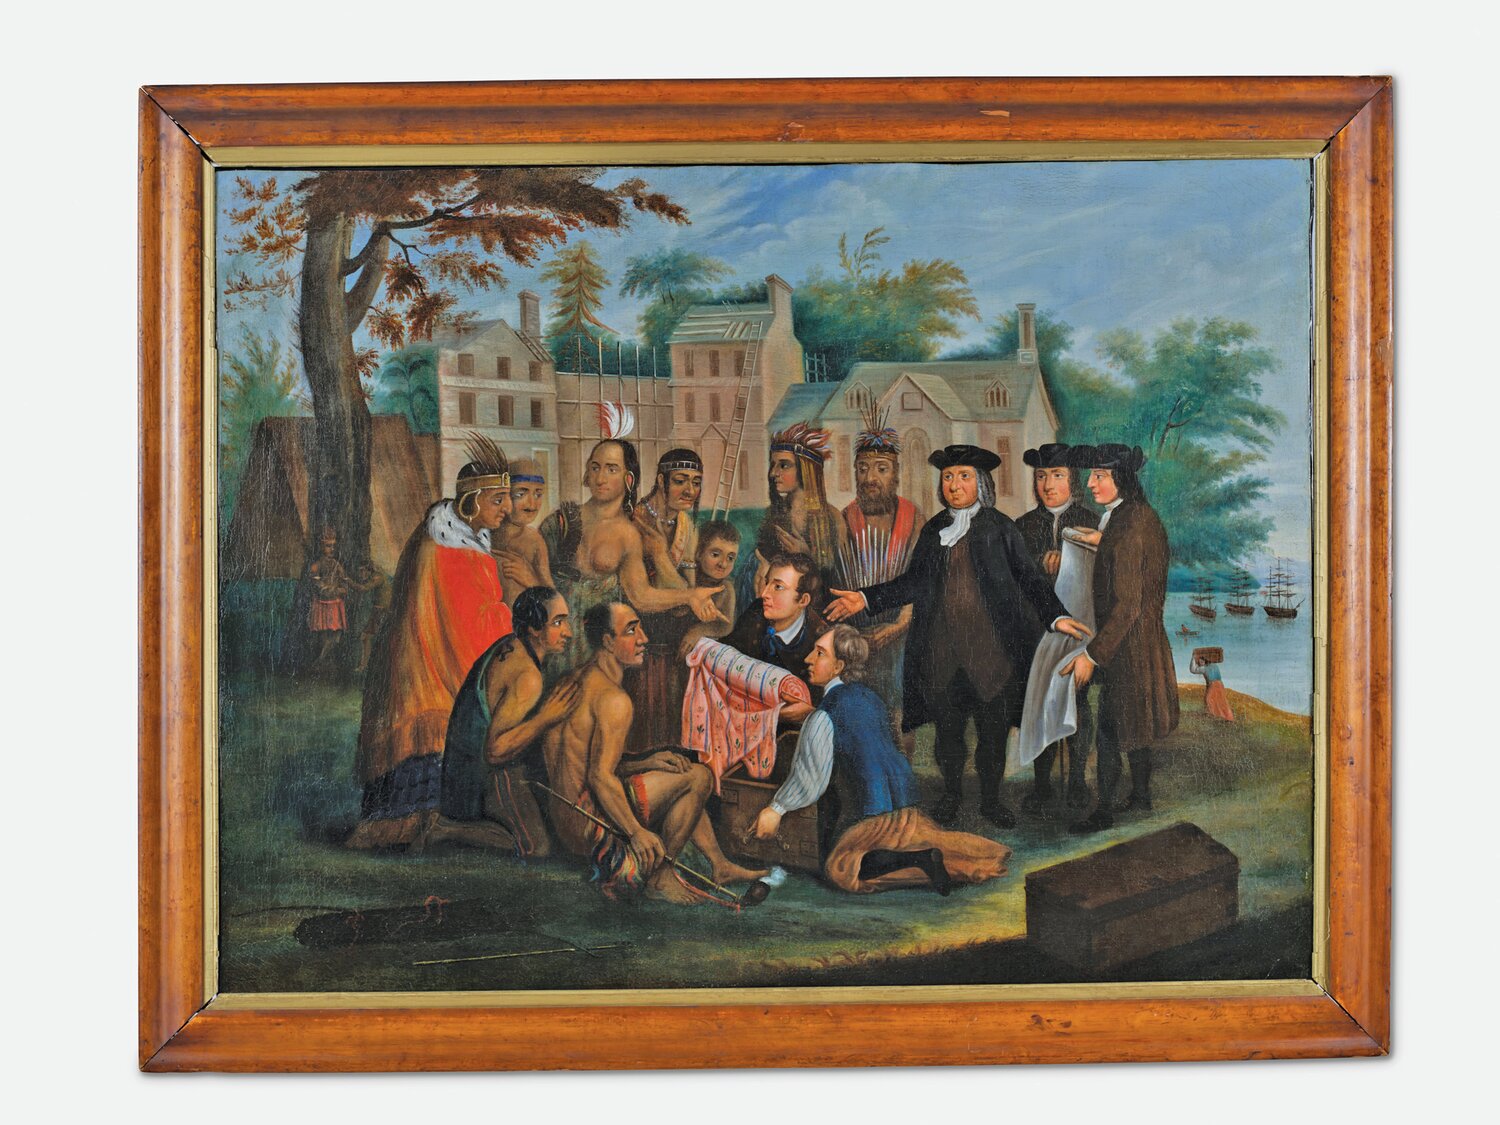 “Penn’s Treaty with the Indians,” ca. 1840, is an oil on canvas by Edward Hicks (1780-1849). James A. Michener Art Museum. Gift of Anthony Seraphin in honor of Robert and Joyce Byers.